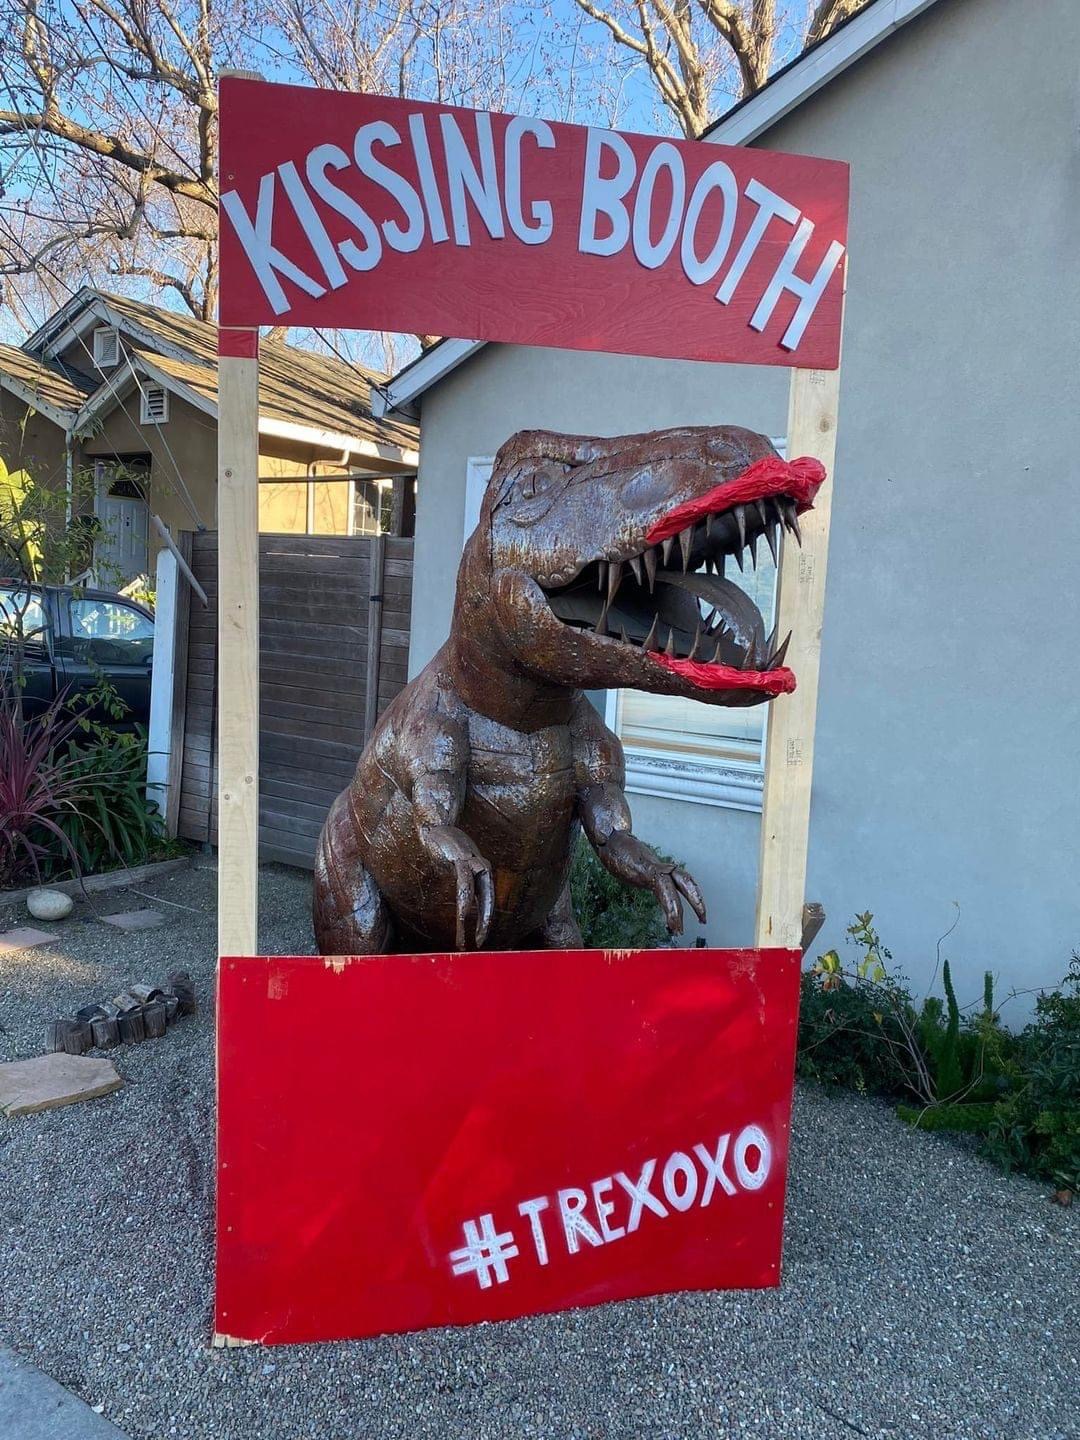 High Quality T-rex kissing booth Blank Meme Template